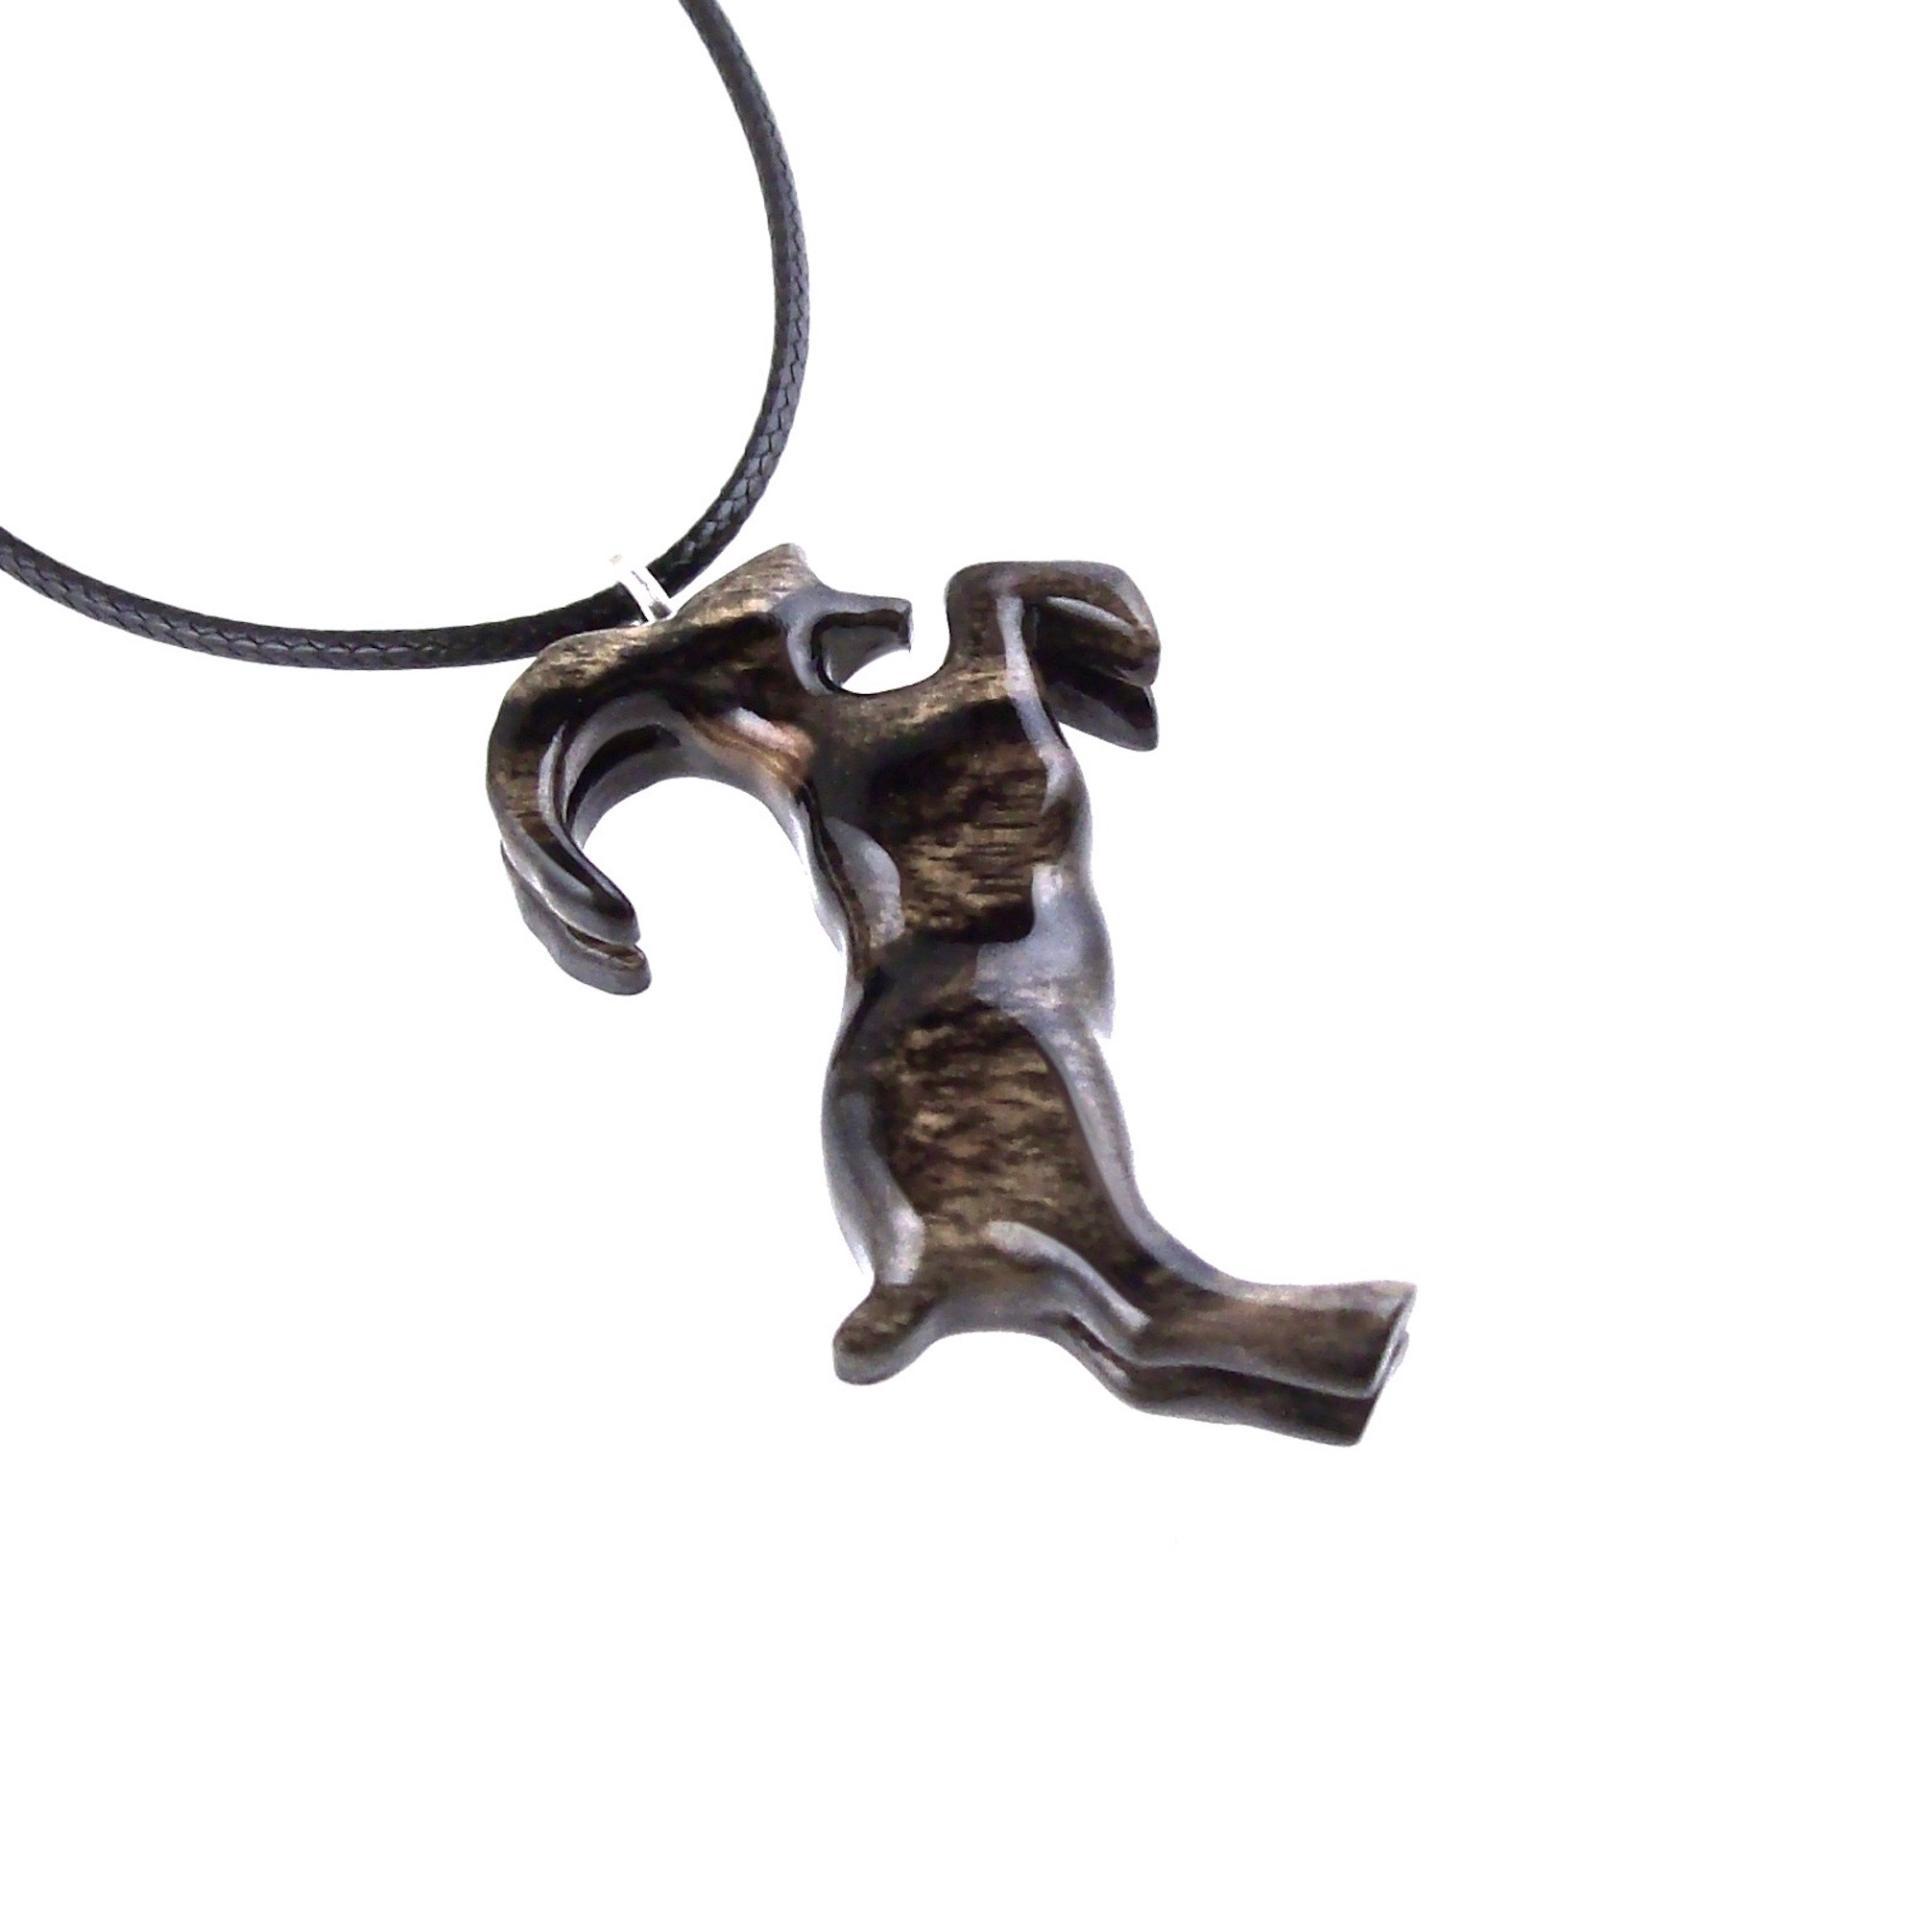 Hand Carved Goat Necklace, Wooden Mountain Goat Pendant, Wood Animal Necklace, Capricorn Jewelry, Spirit Animal Totem, Gift for Him Her